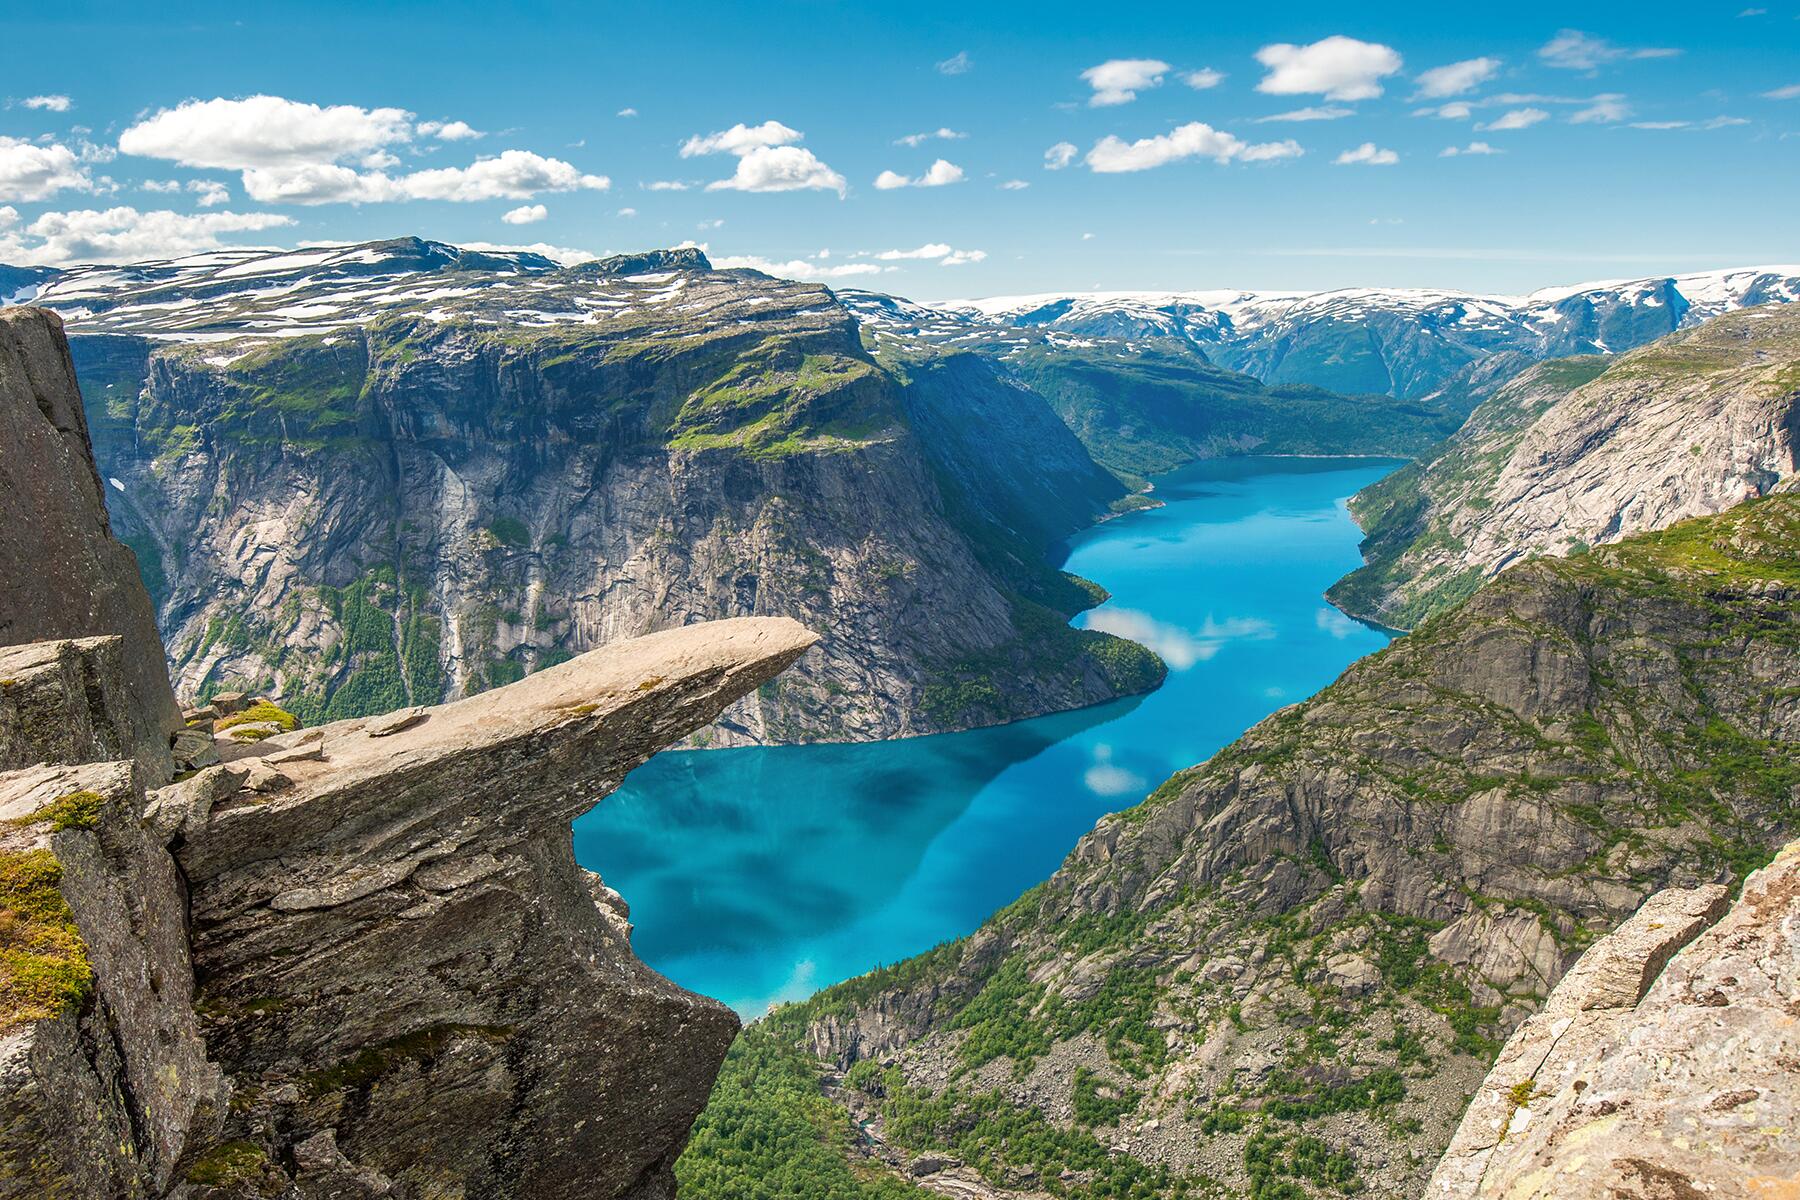 warmest time to visit norway